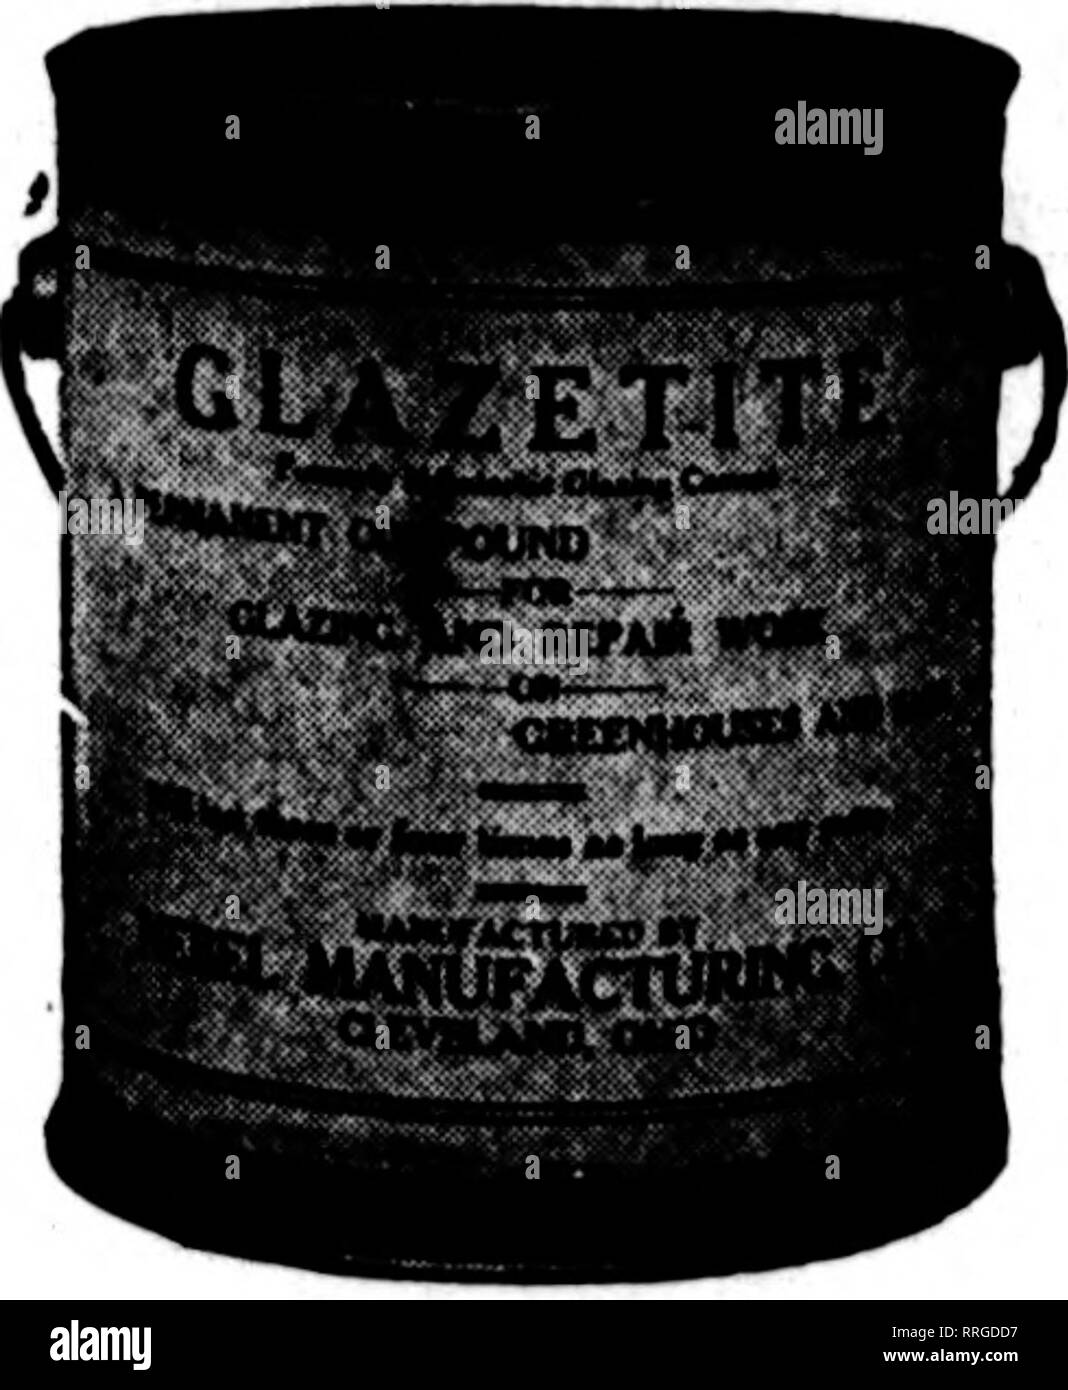 . Florists' review [microform]. Floriculture. 130 The Florists^ Review OCTOBBB 7, 1920 FOR A PERFECT JOB USE. GLAZETITE FORMERLY NEBBLASTIC GLAZETITE is carried in stock by the following reliable firms in 65 and 35-gallon drums, tive-gallon cans and one-gallon cans, and they sell it to you on a money-back guarantee: Henry A. Dreer, Pniladelphia, Pa. Vaughan's Seed Store, Chicaso. 111. J. Bolgiano &amp; Son, Baltimore, Md. James Vick's Sons, Rochester, N. Y. F. W. Boltiiano. Washington. D. C. Standard Seed Co., Kansas City, Mo. Beckert's Seed Store, Pittsburgh. Pa. o, Kooyman Co., Skn Francisco Stock Photo